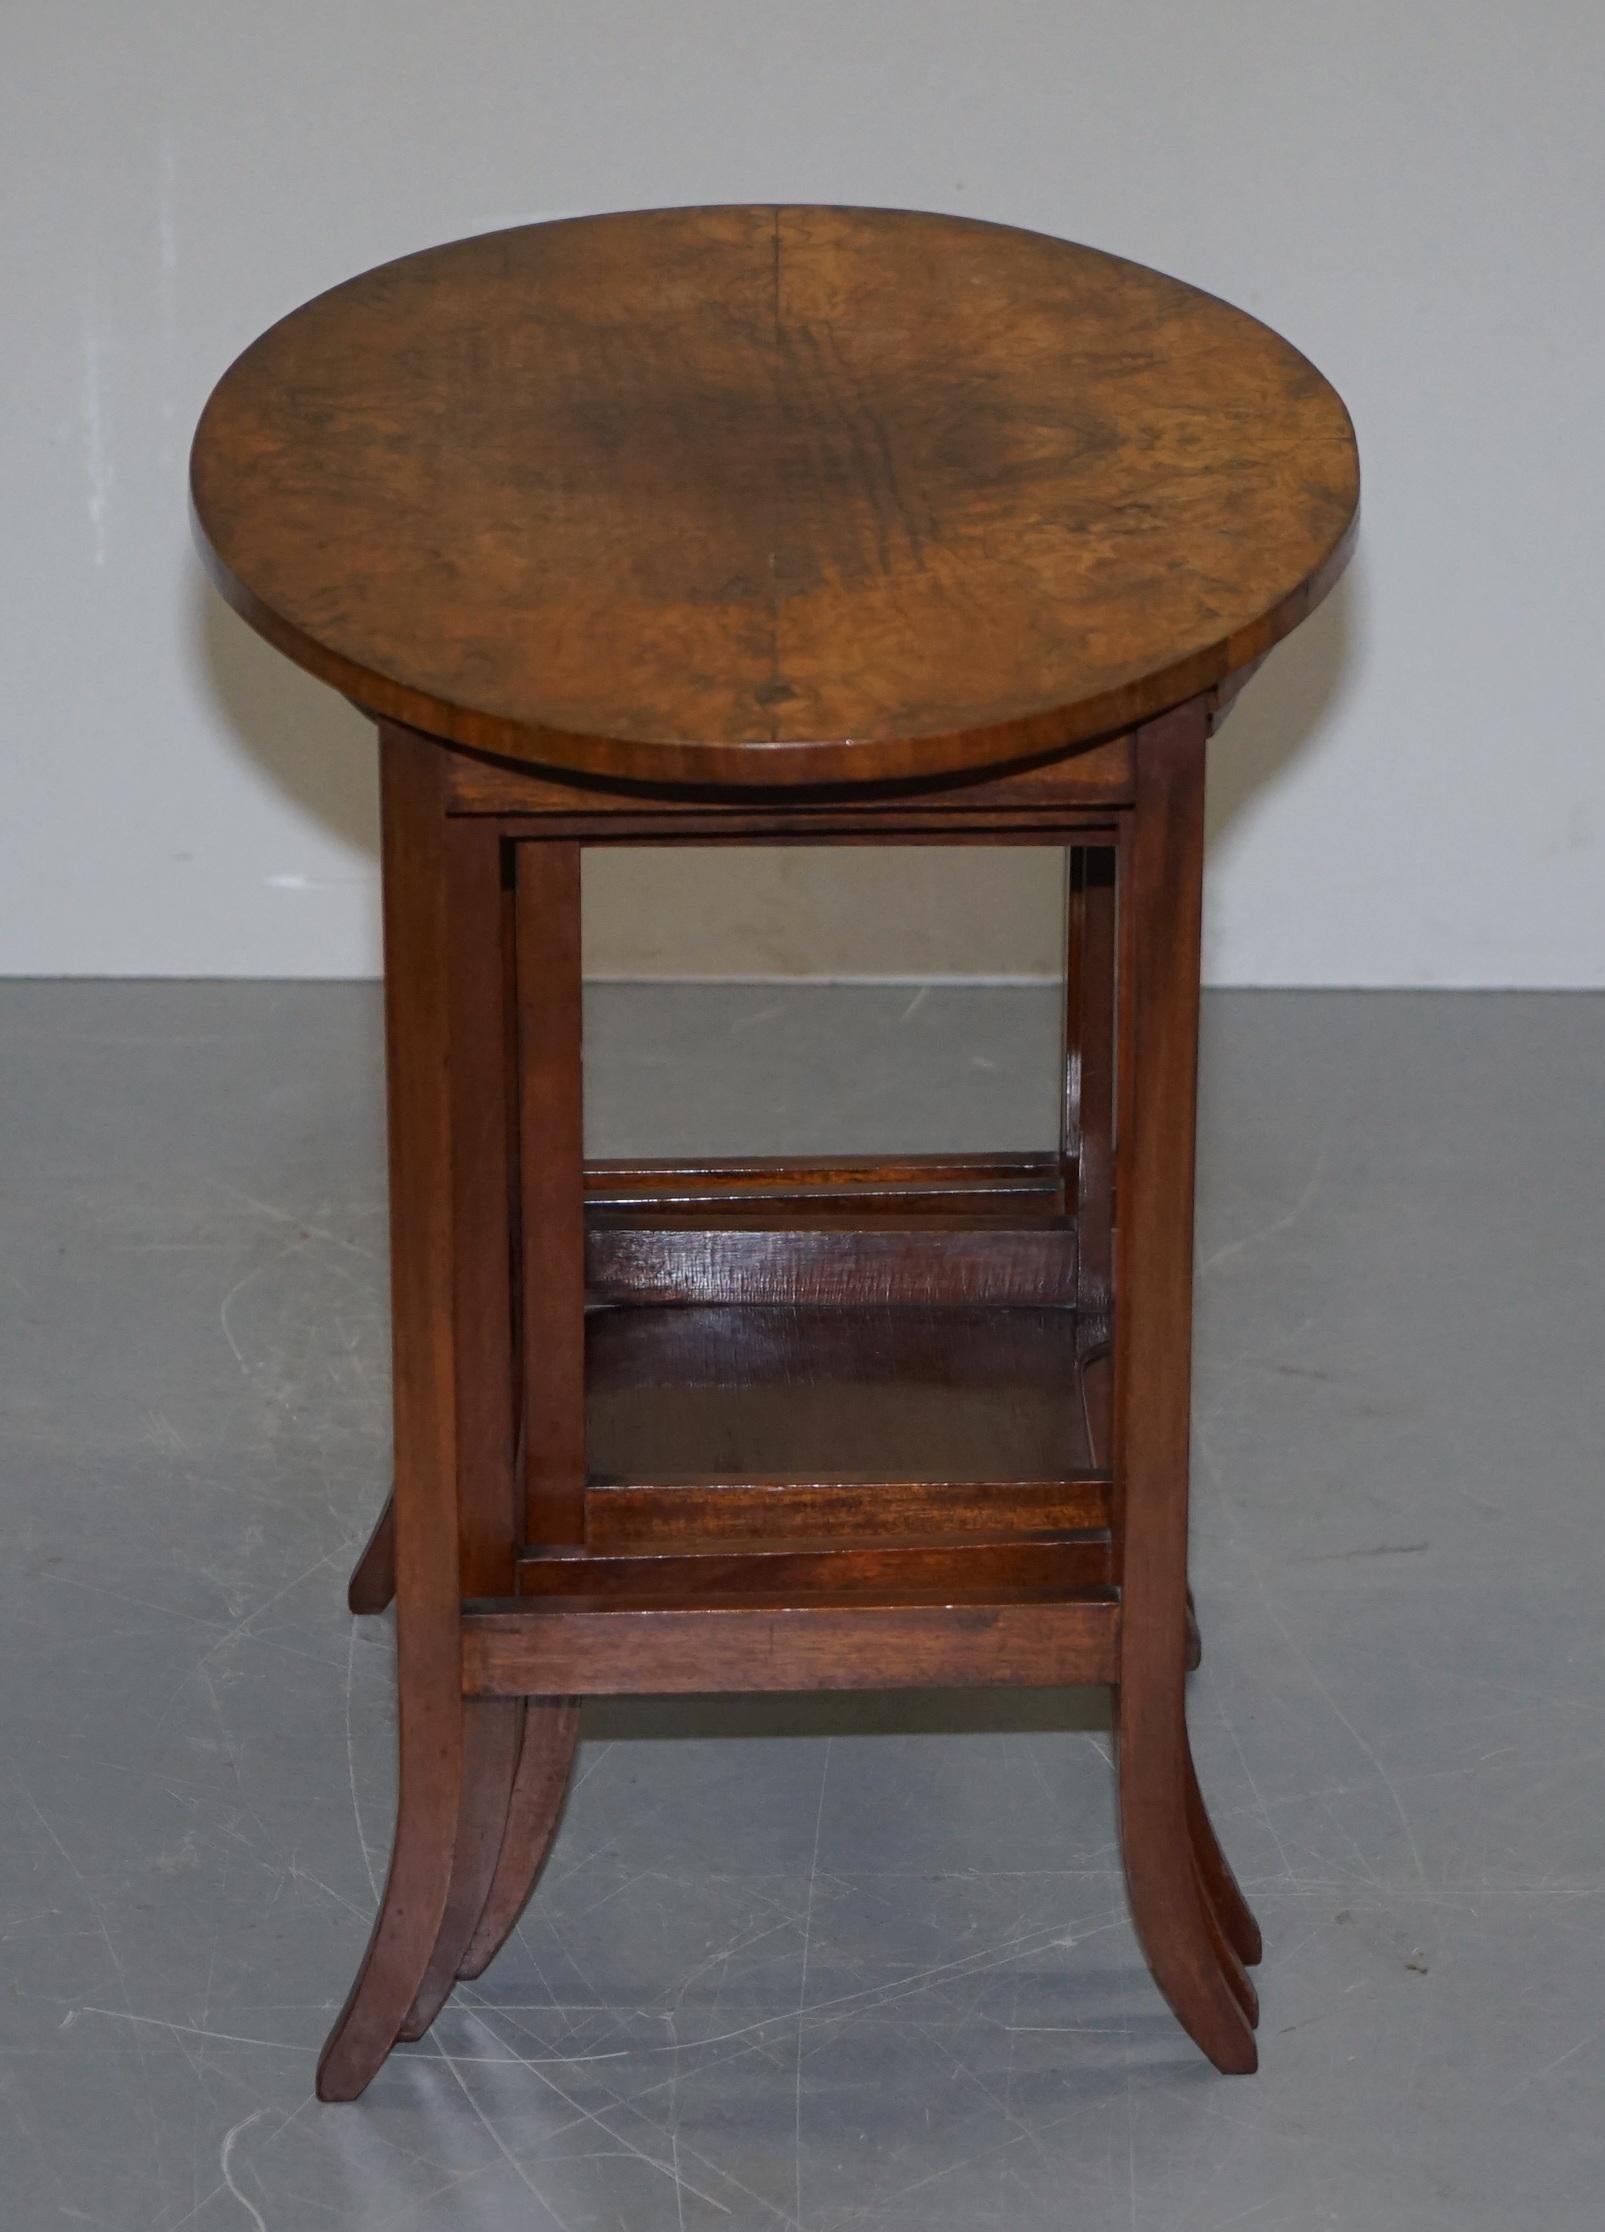 Lovely circa 1900 Late Victorian Burr Walnut Nest of Tables with Oval Main Piece For Sale 4